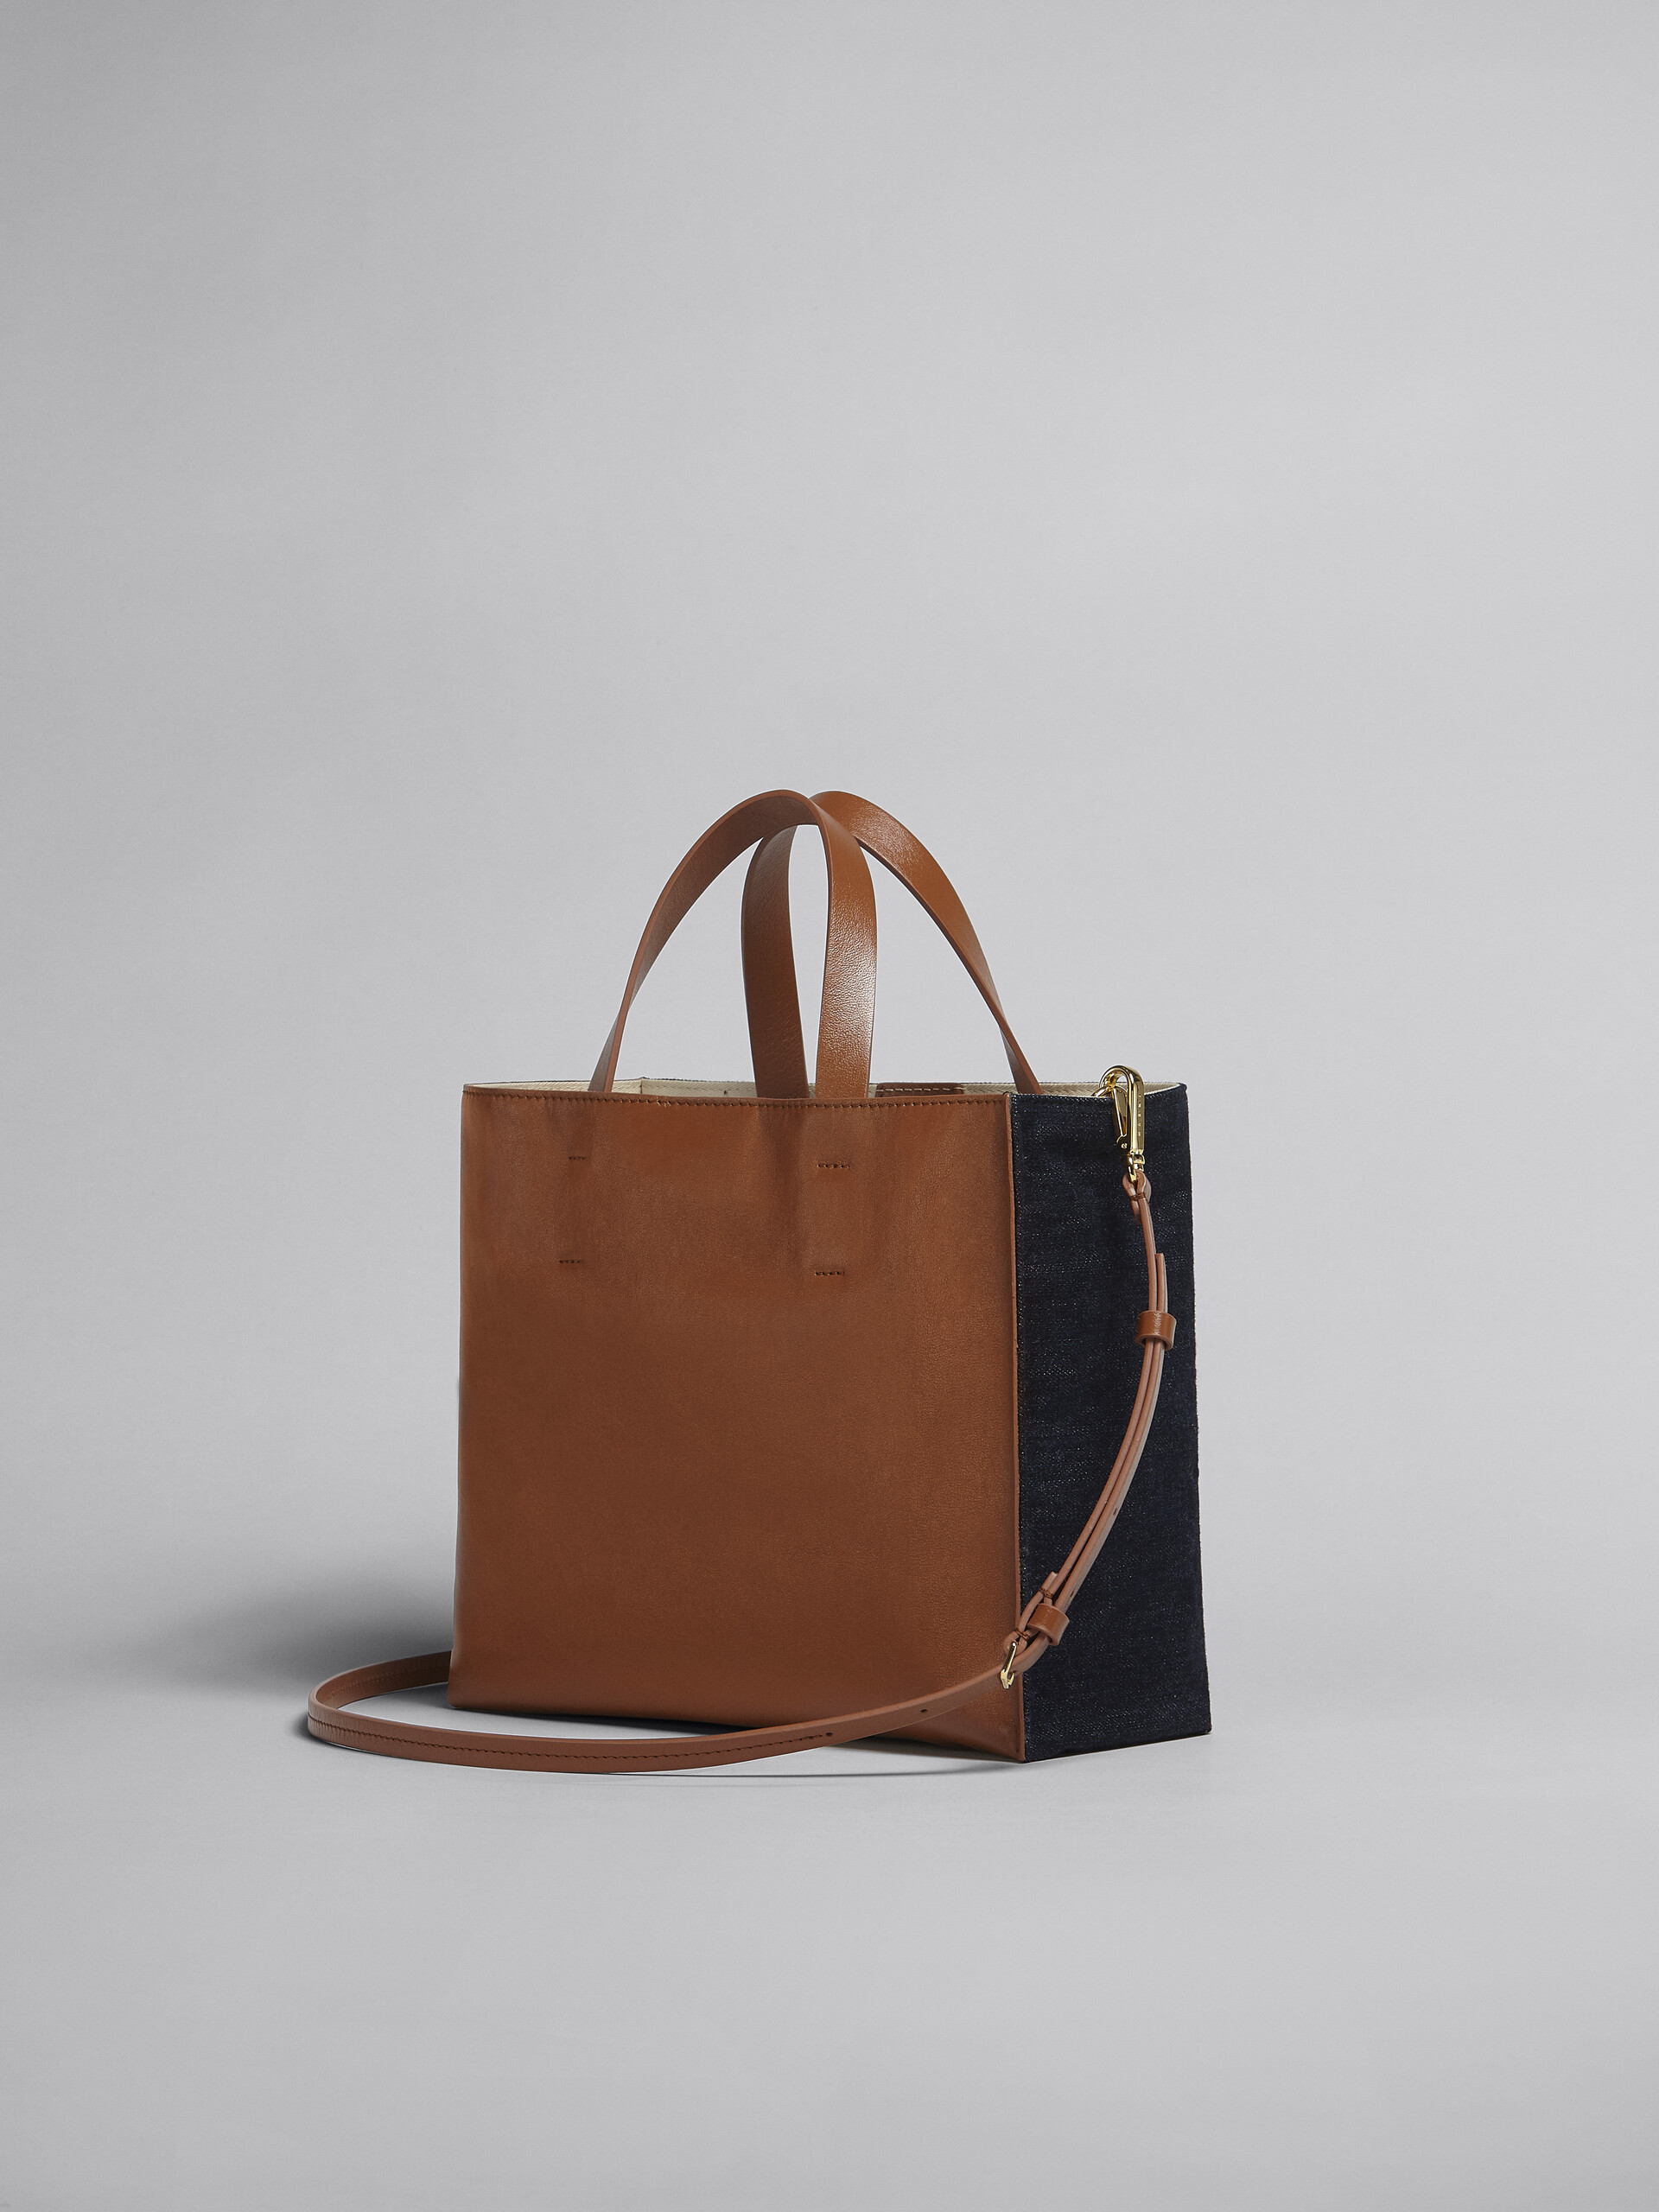 MUSEO SOFT small bag in denim and leather - Shopping Bags - Image 3